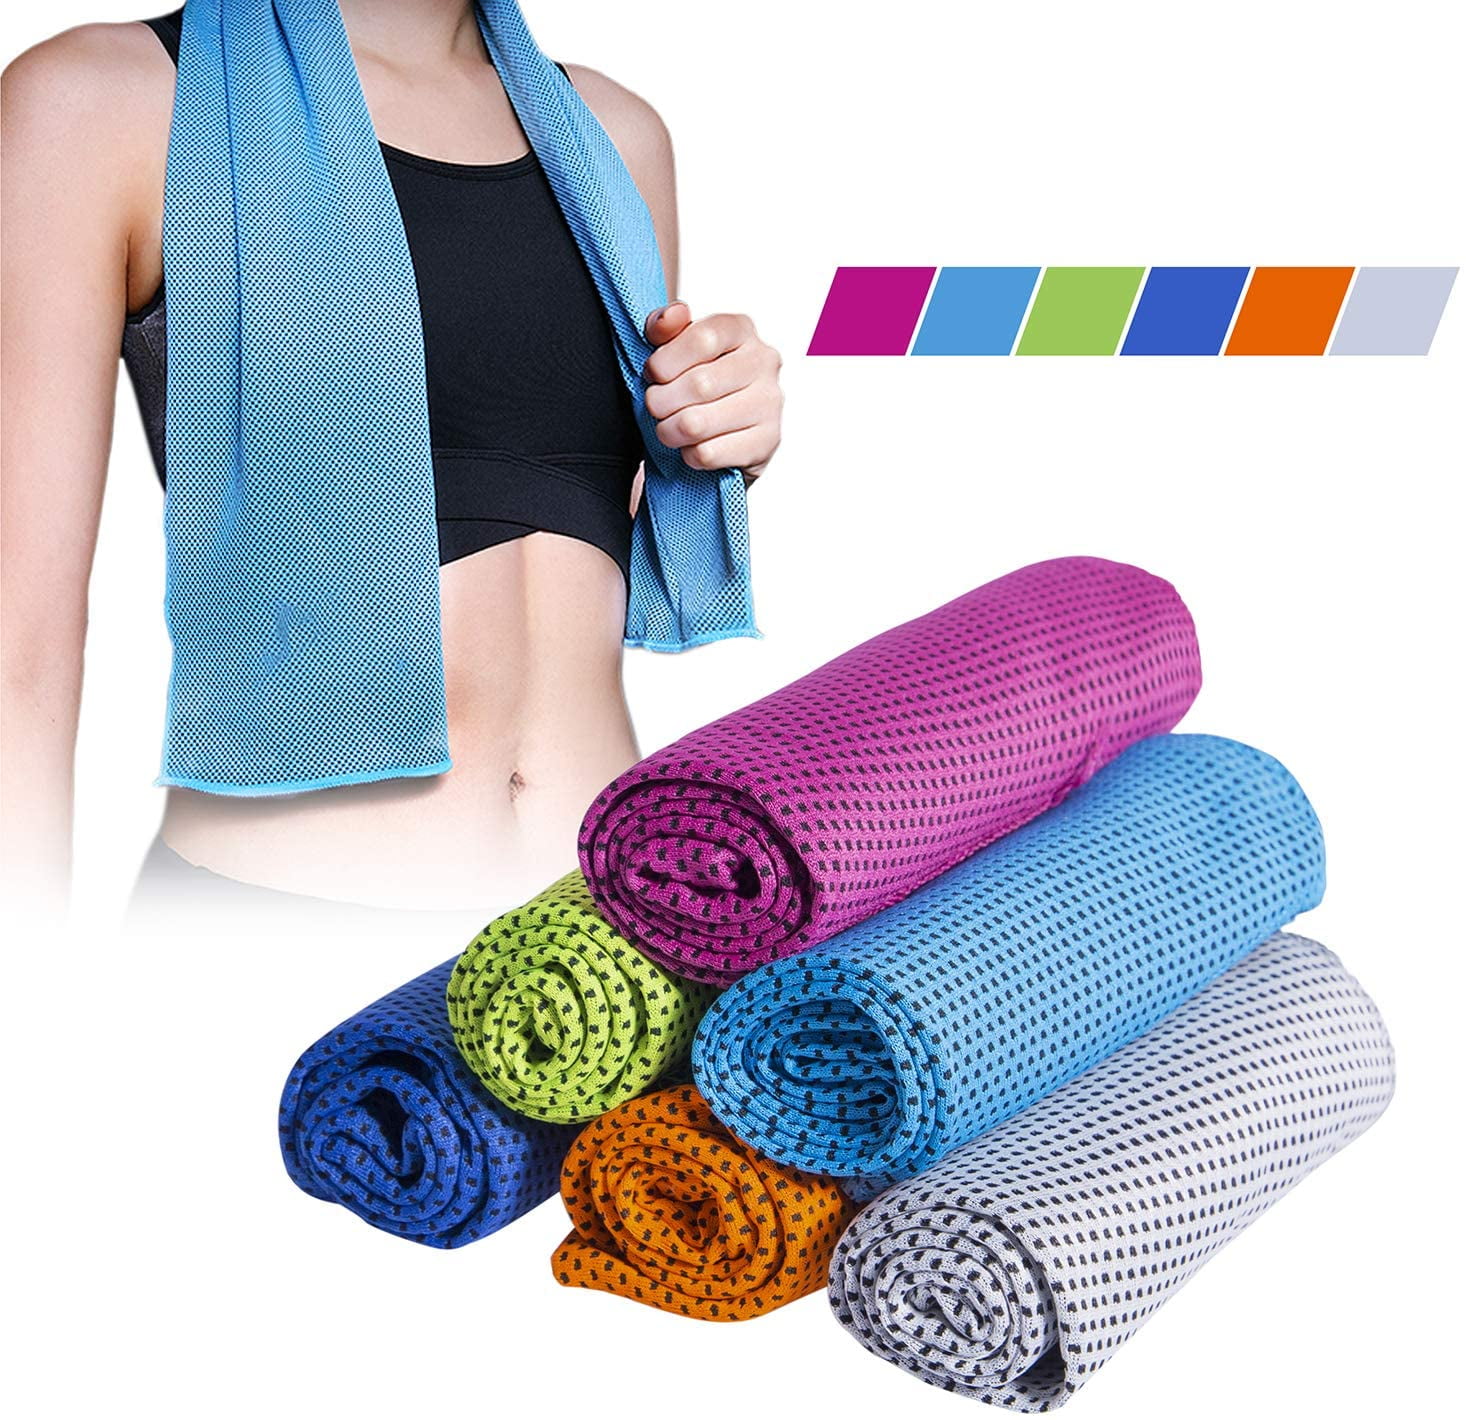 Details about   10Pack Ice Cold Instant Cooling Towel Running Jogging Gym Chilly Pad Sports Yoga 